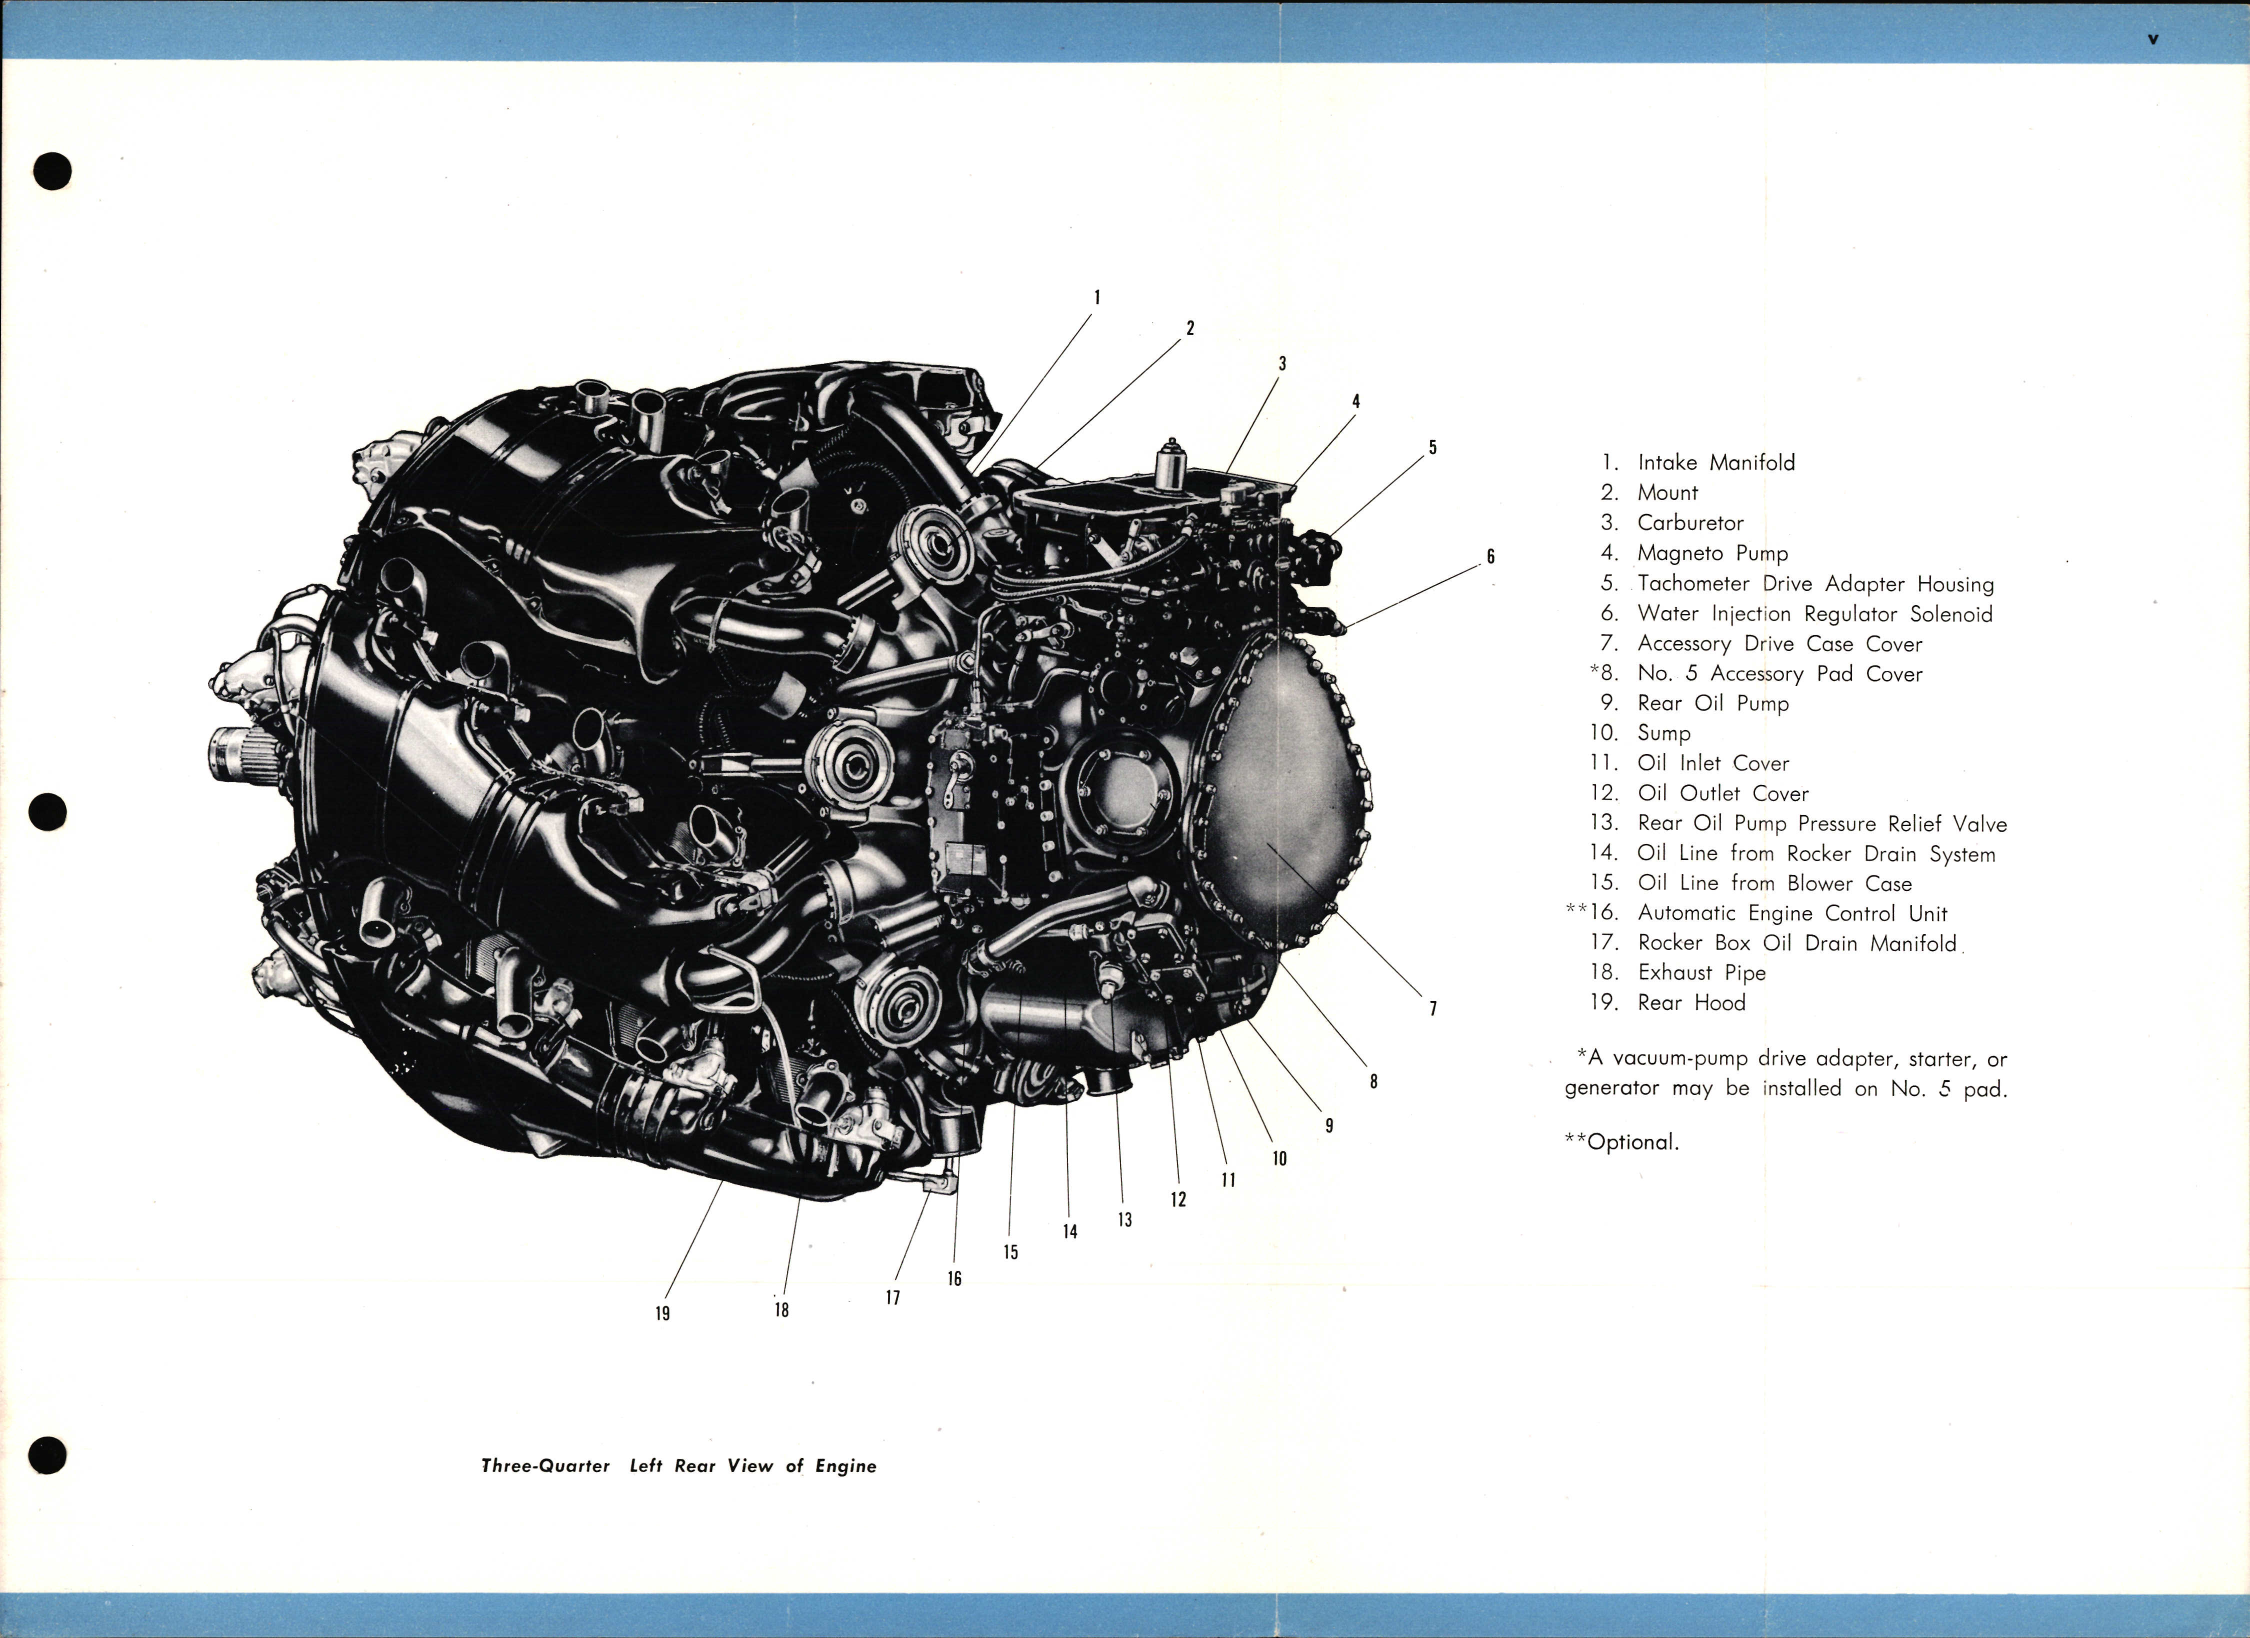 Sample page 5 from AirCorps Library document: Maintenance and Service for Wasp Major R-4360 Engines